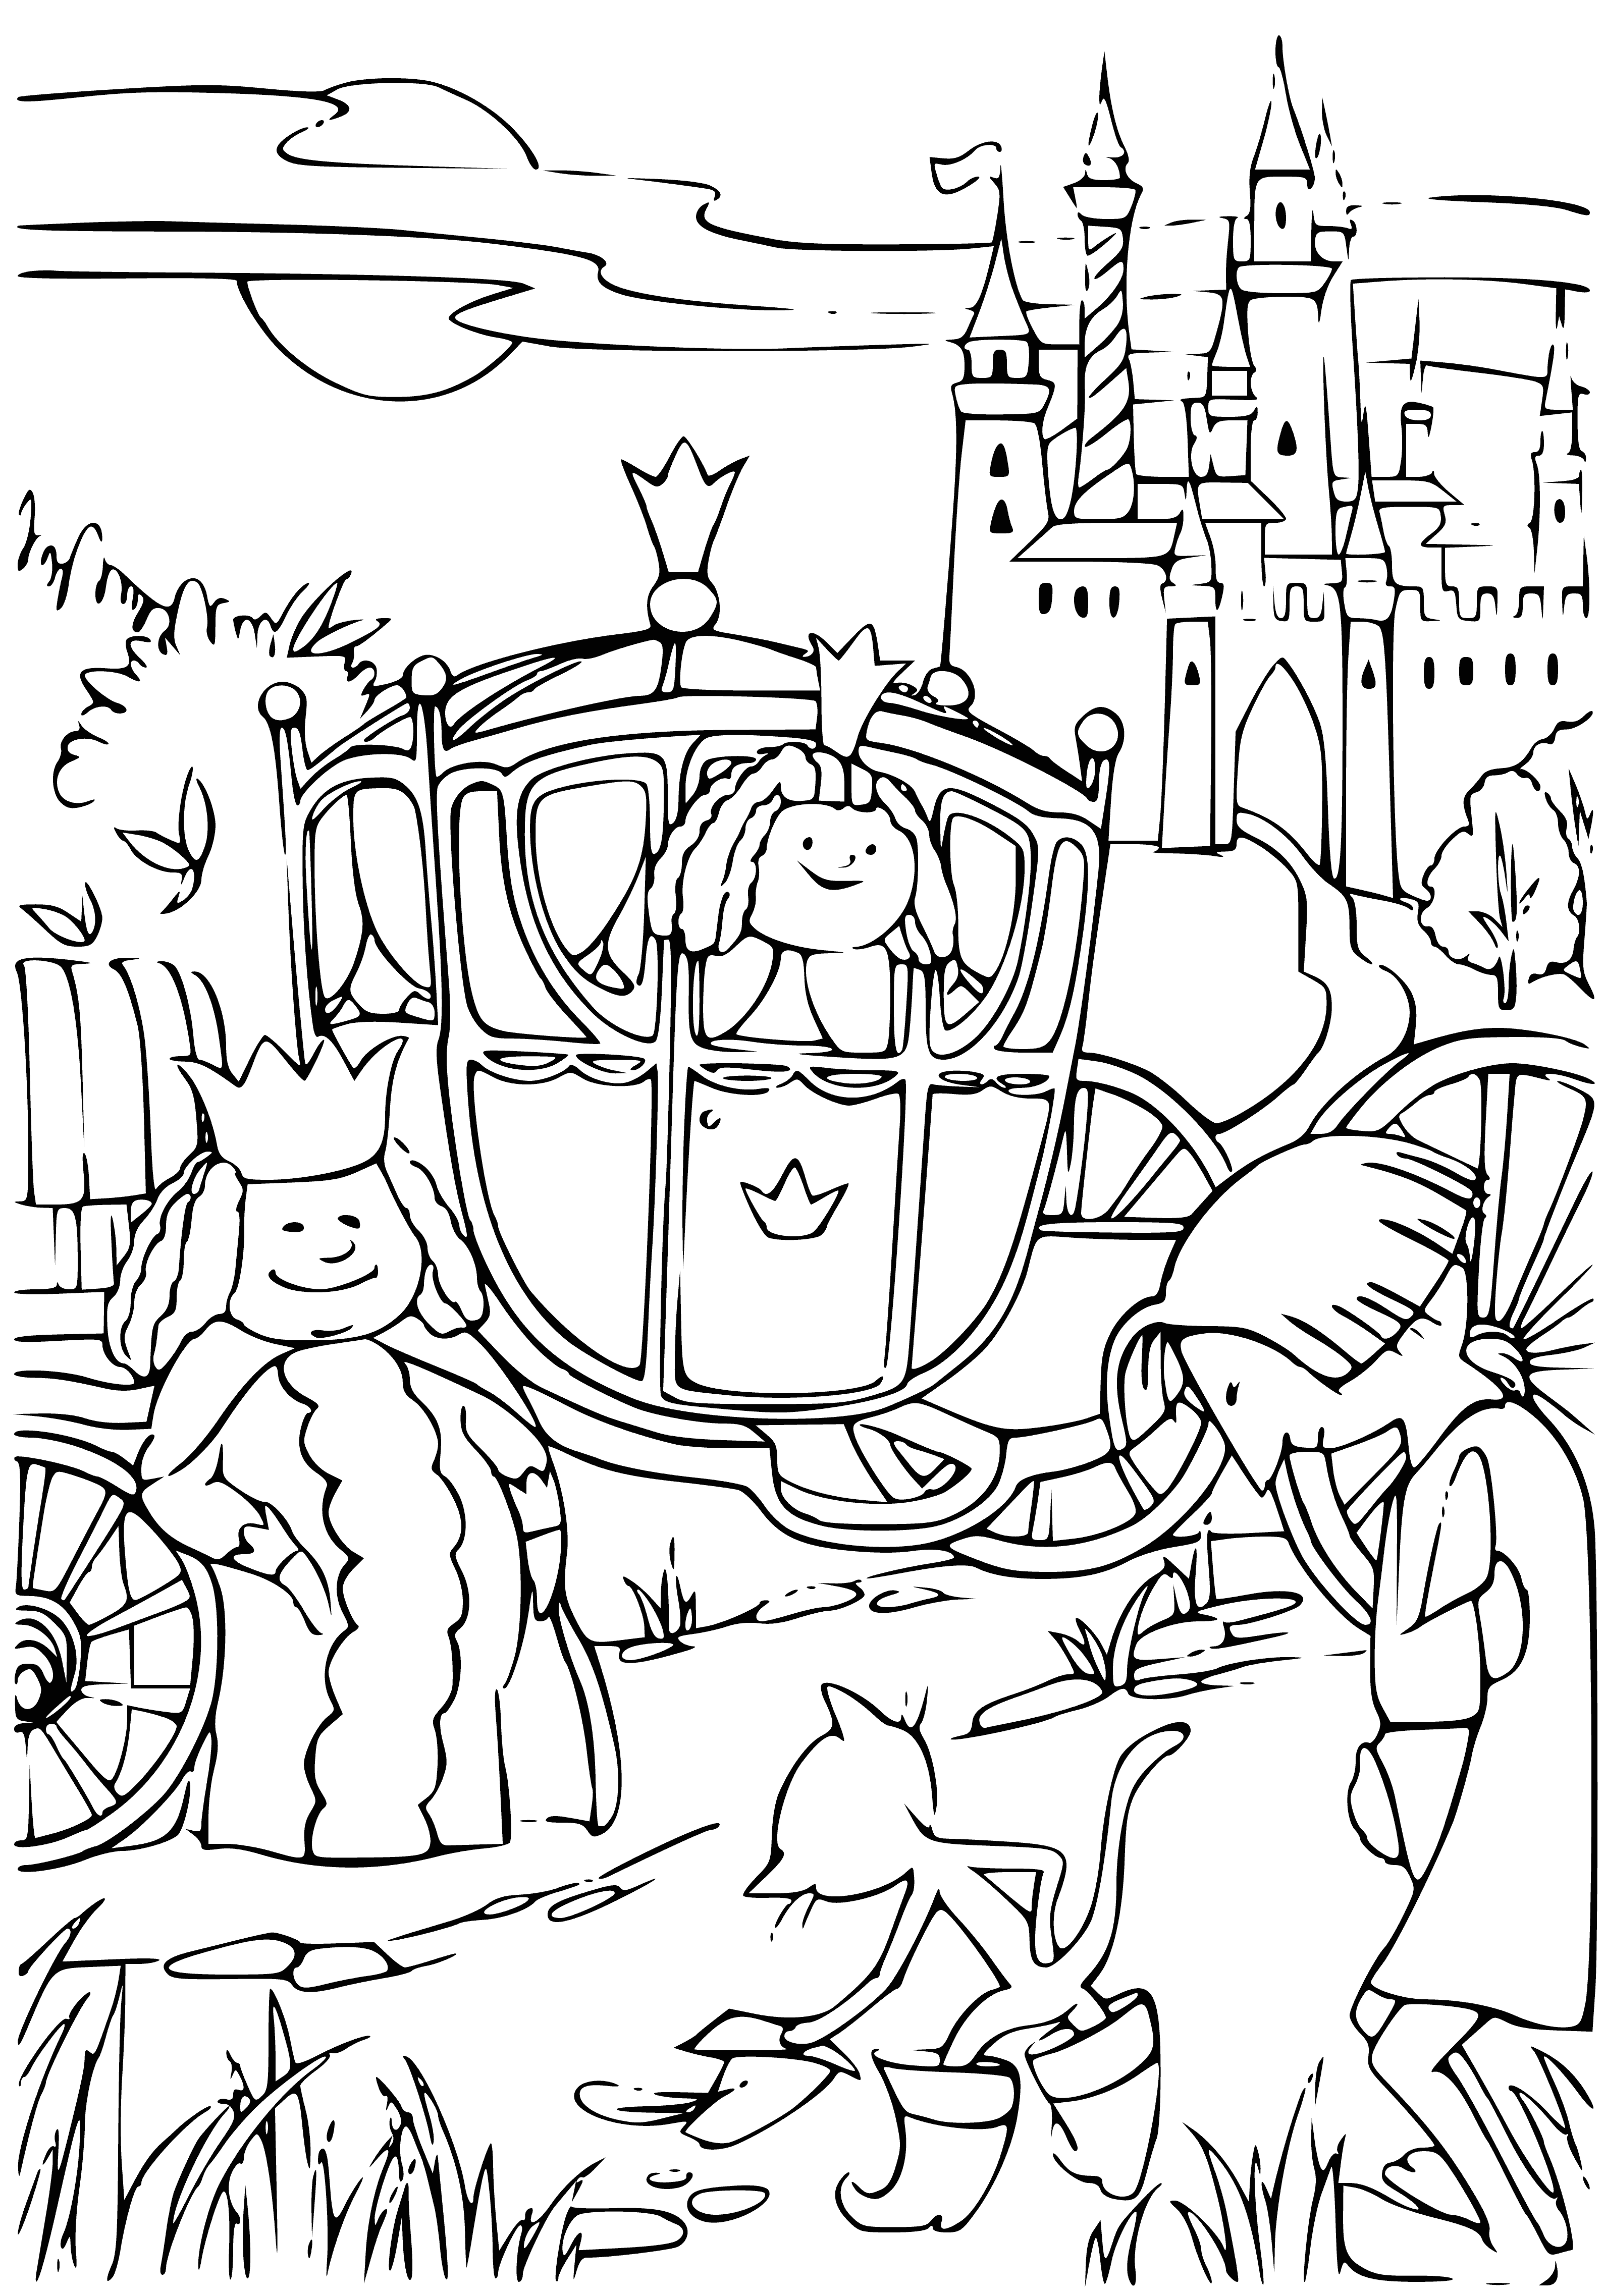 coloring page: Cat & mouse stand face-to-face in a coloring page: cat happy, mouse scared, trying to escape.